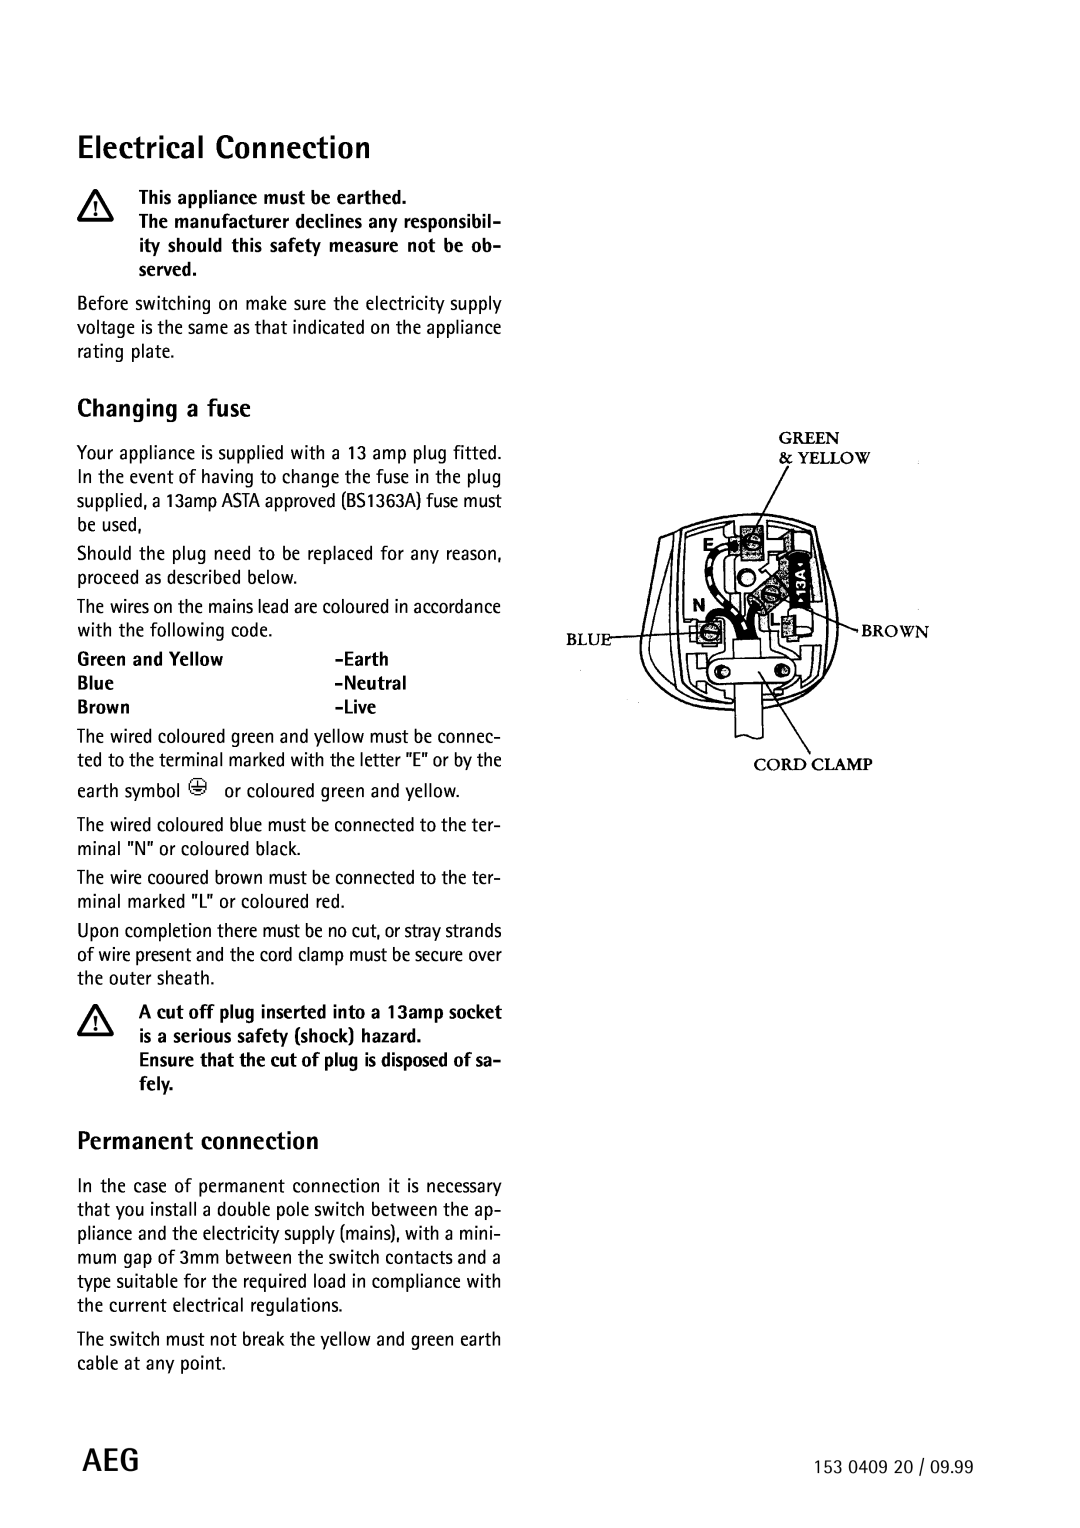 Electrolux 55750 manual Electrical Connection, Changing a fuse, Permanent connection 